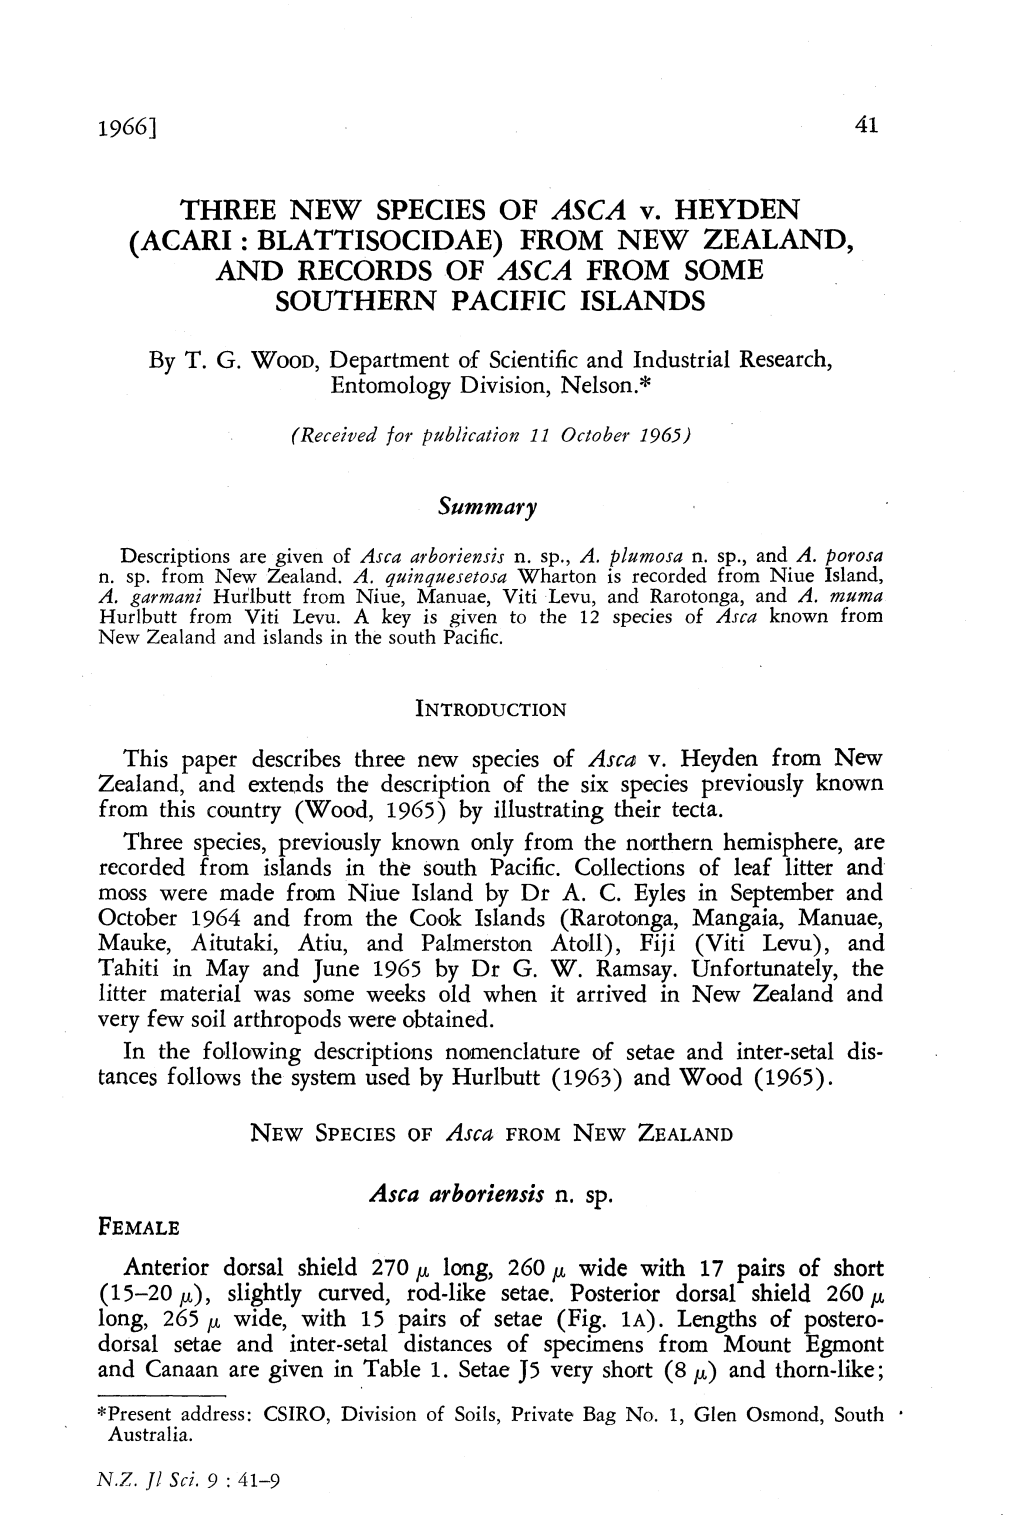 THREE NEW SPECIES of ASCA V. HEYDEN (ACARI: BLATTISOCIDAE) from NEW ZEALAND, and RECORDS of ASCA from SOME SOUTHERN PACIFIC ISLANDS